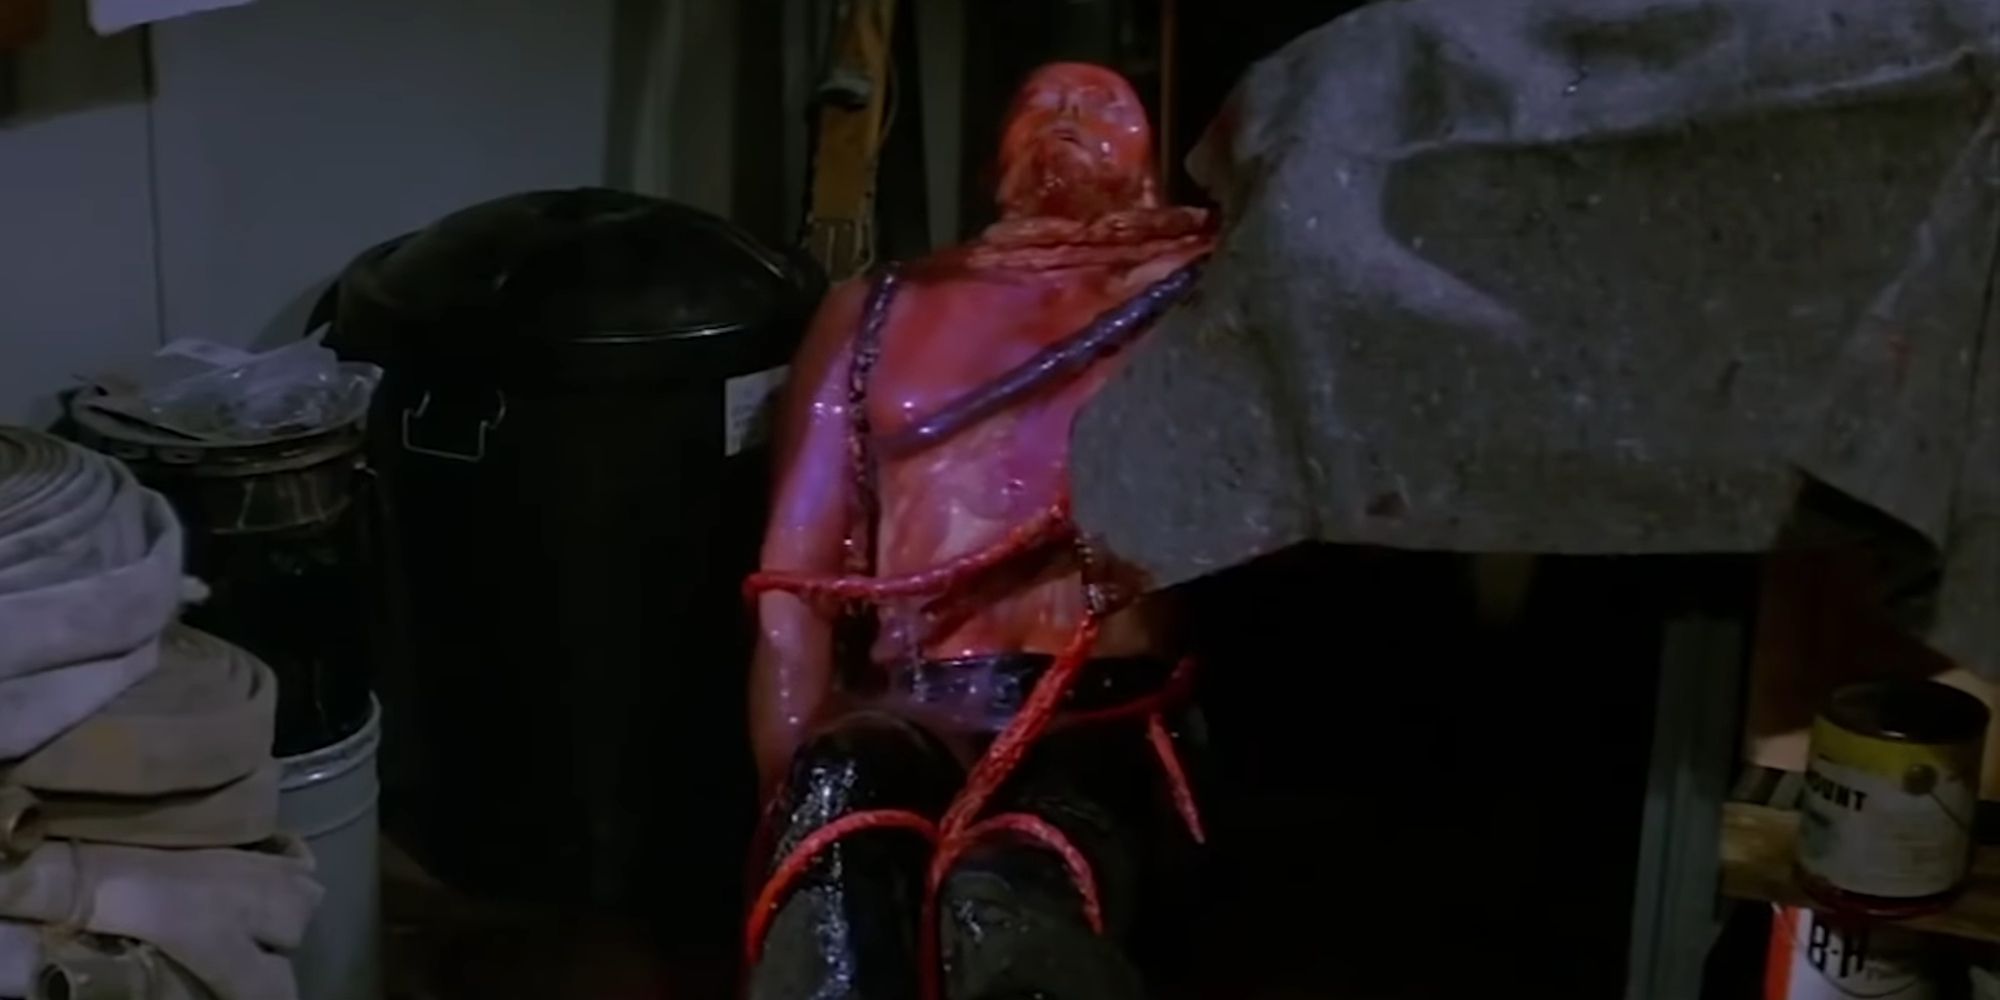 Bennings being assimilated by the Thing in John Carpenter's The Thing